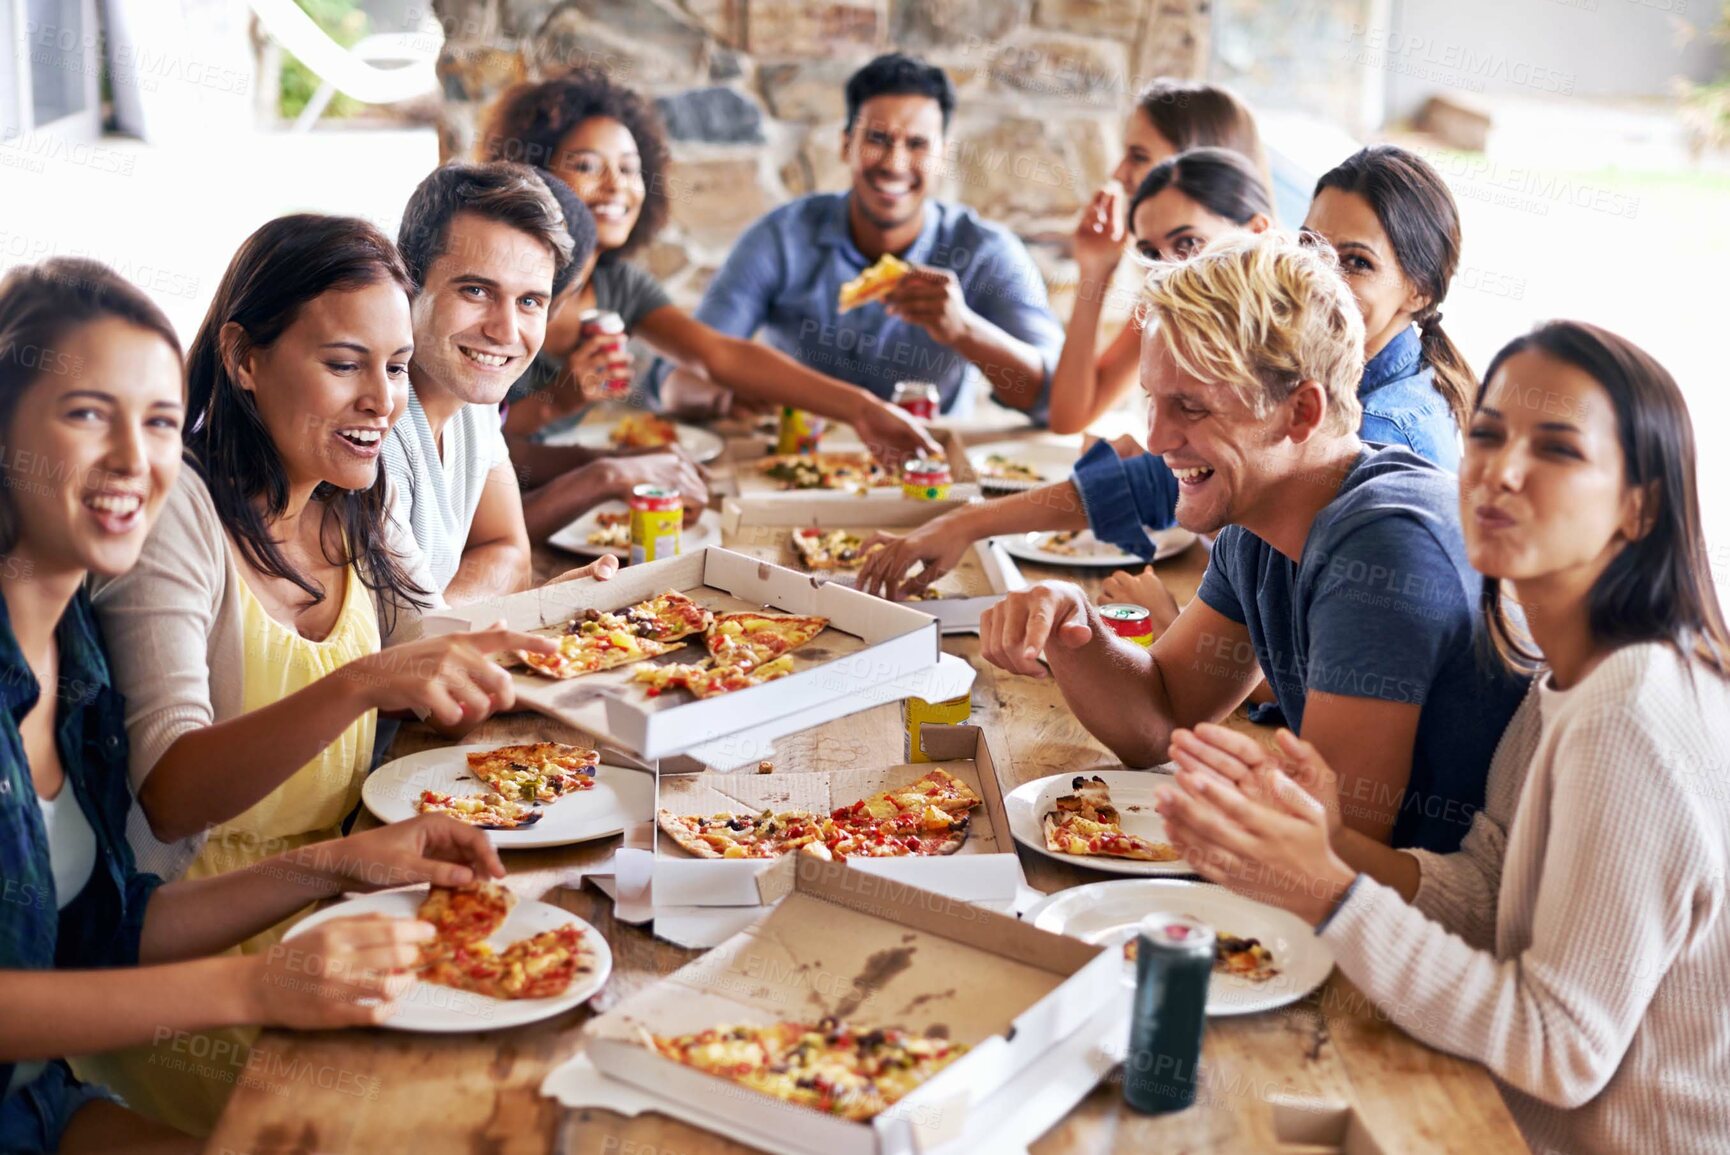 Buy stock photo Cropped shot of a group of friends enjoying pizza together